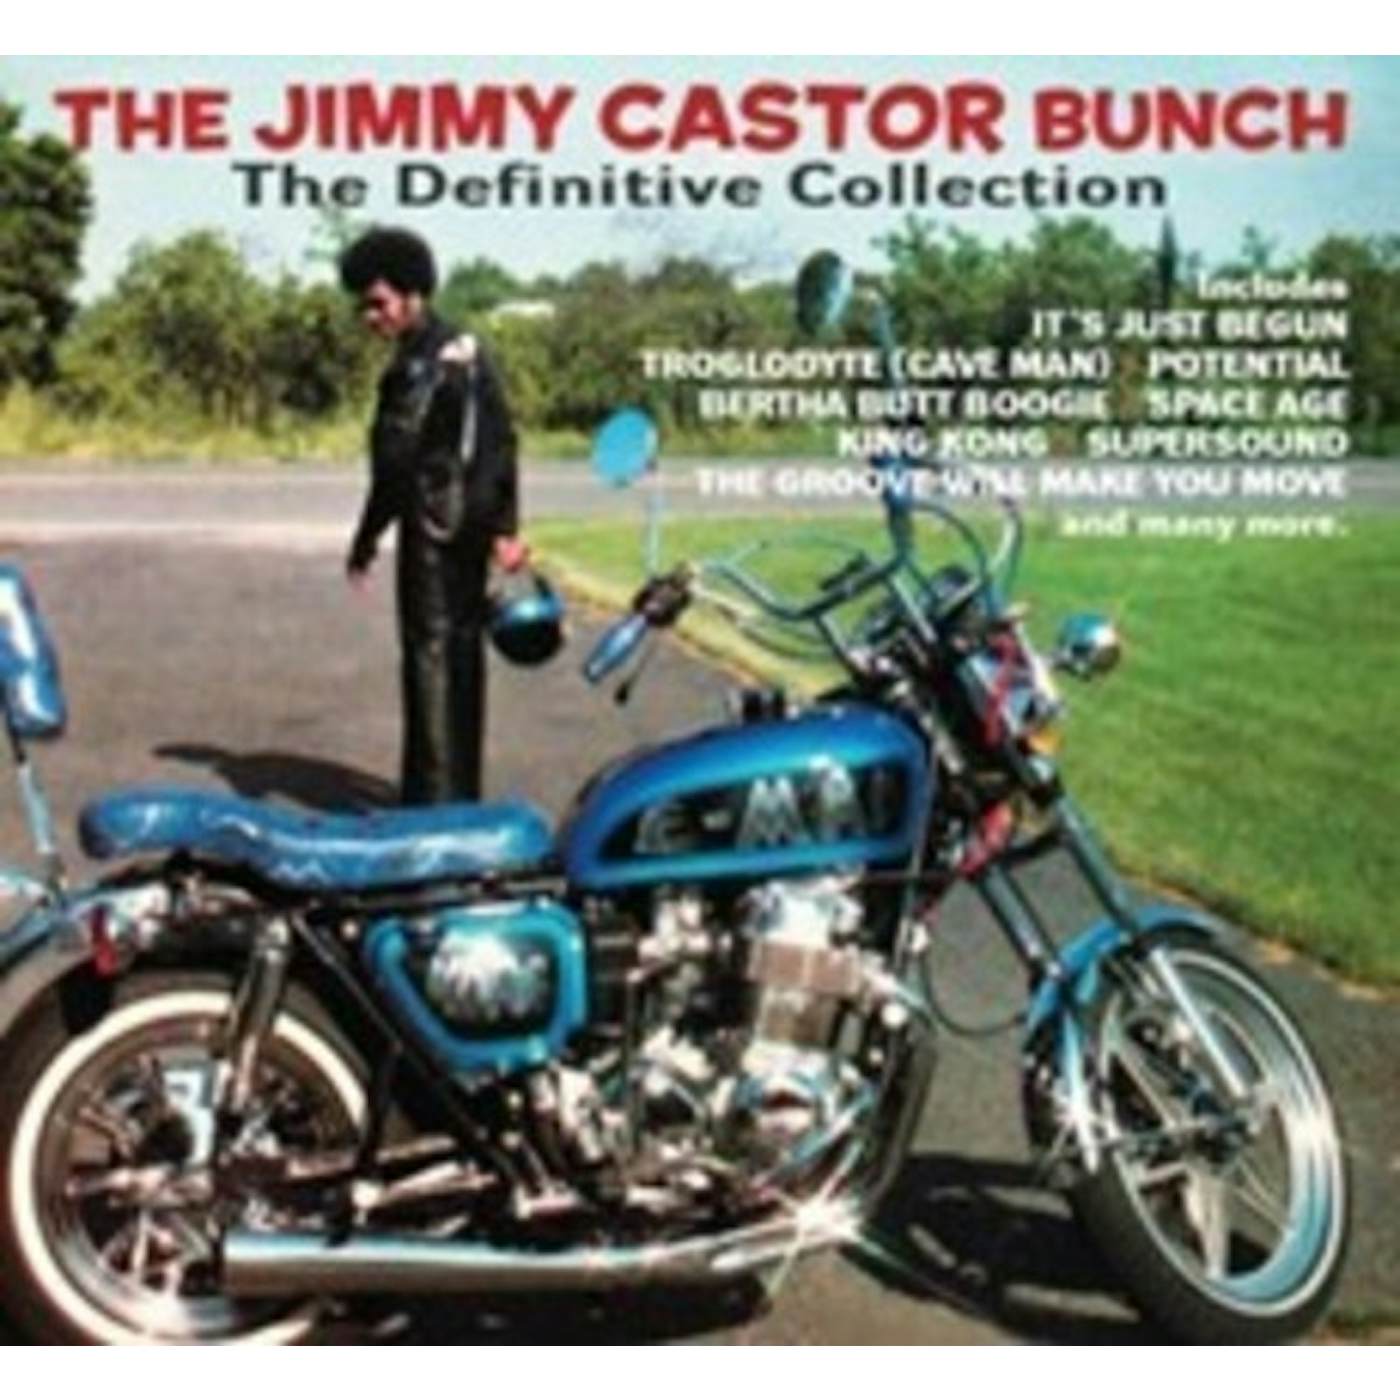 The Jimmy Castor Bunch DEFINITIVE COLLECTION CD